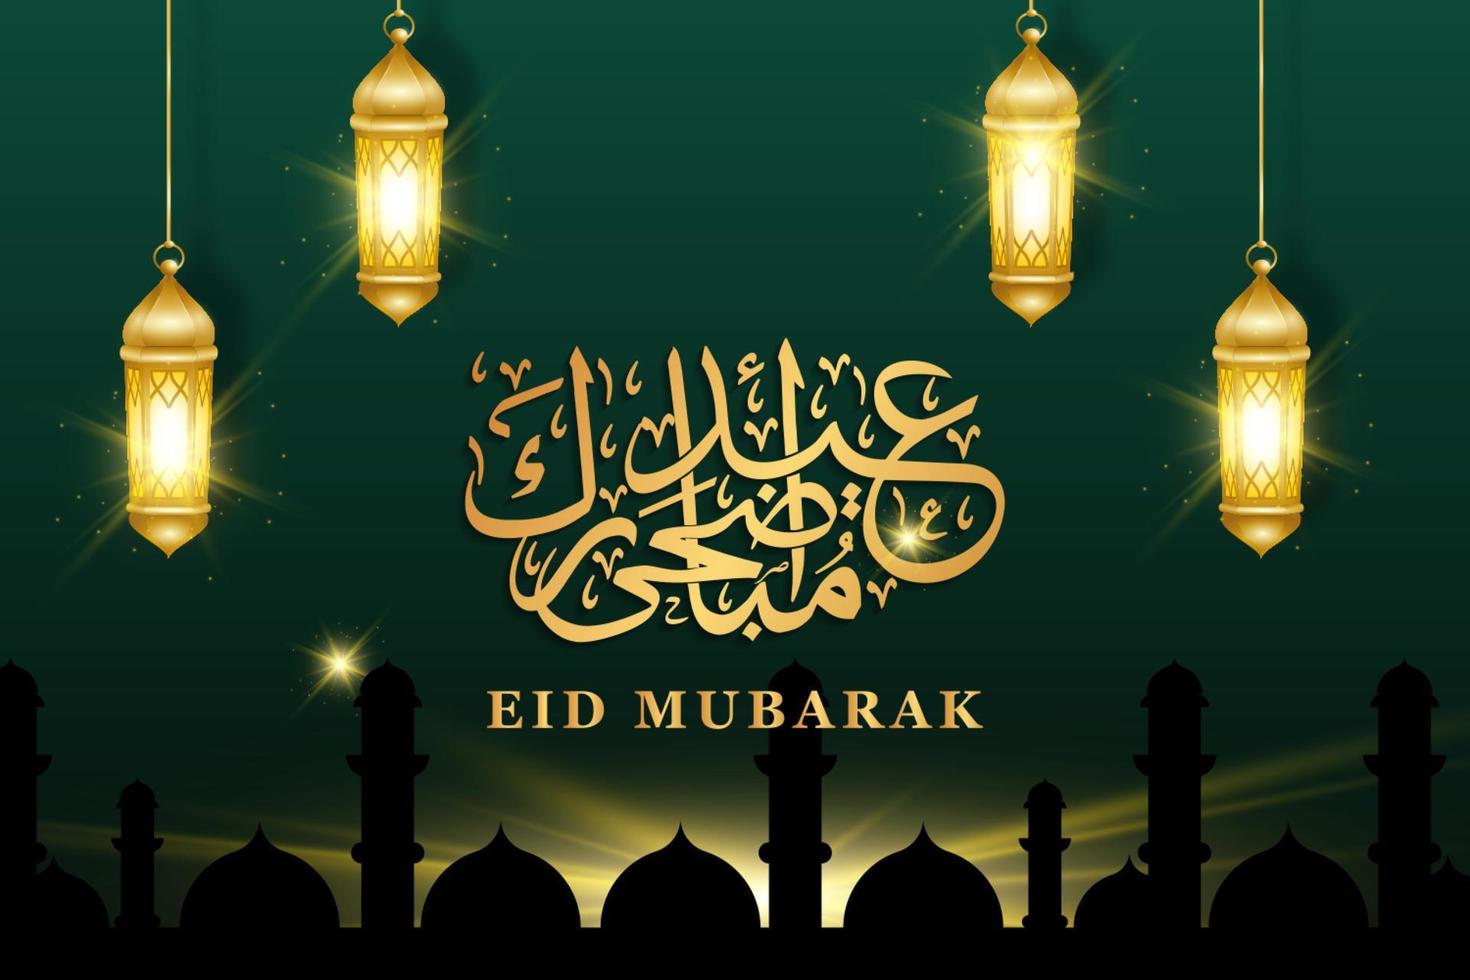 eid mubarak greeting background with mosque and chandelier silhouette concept, islamic calligraphy vector